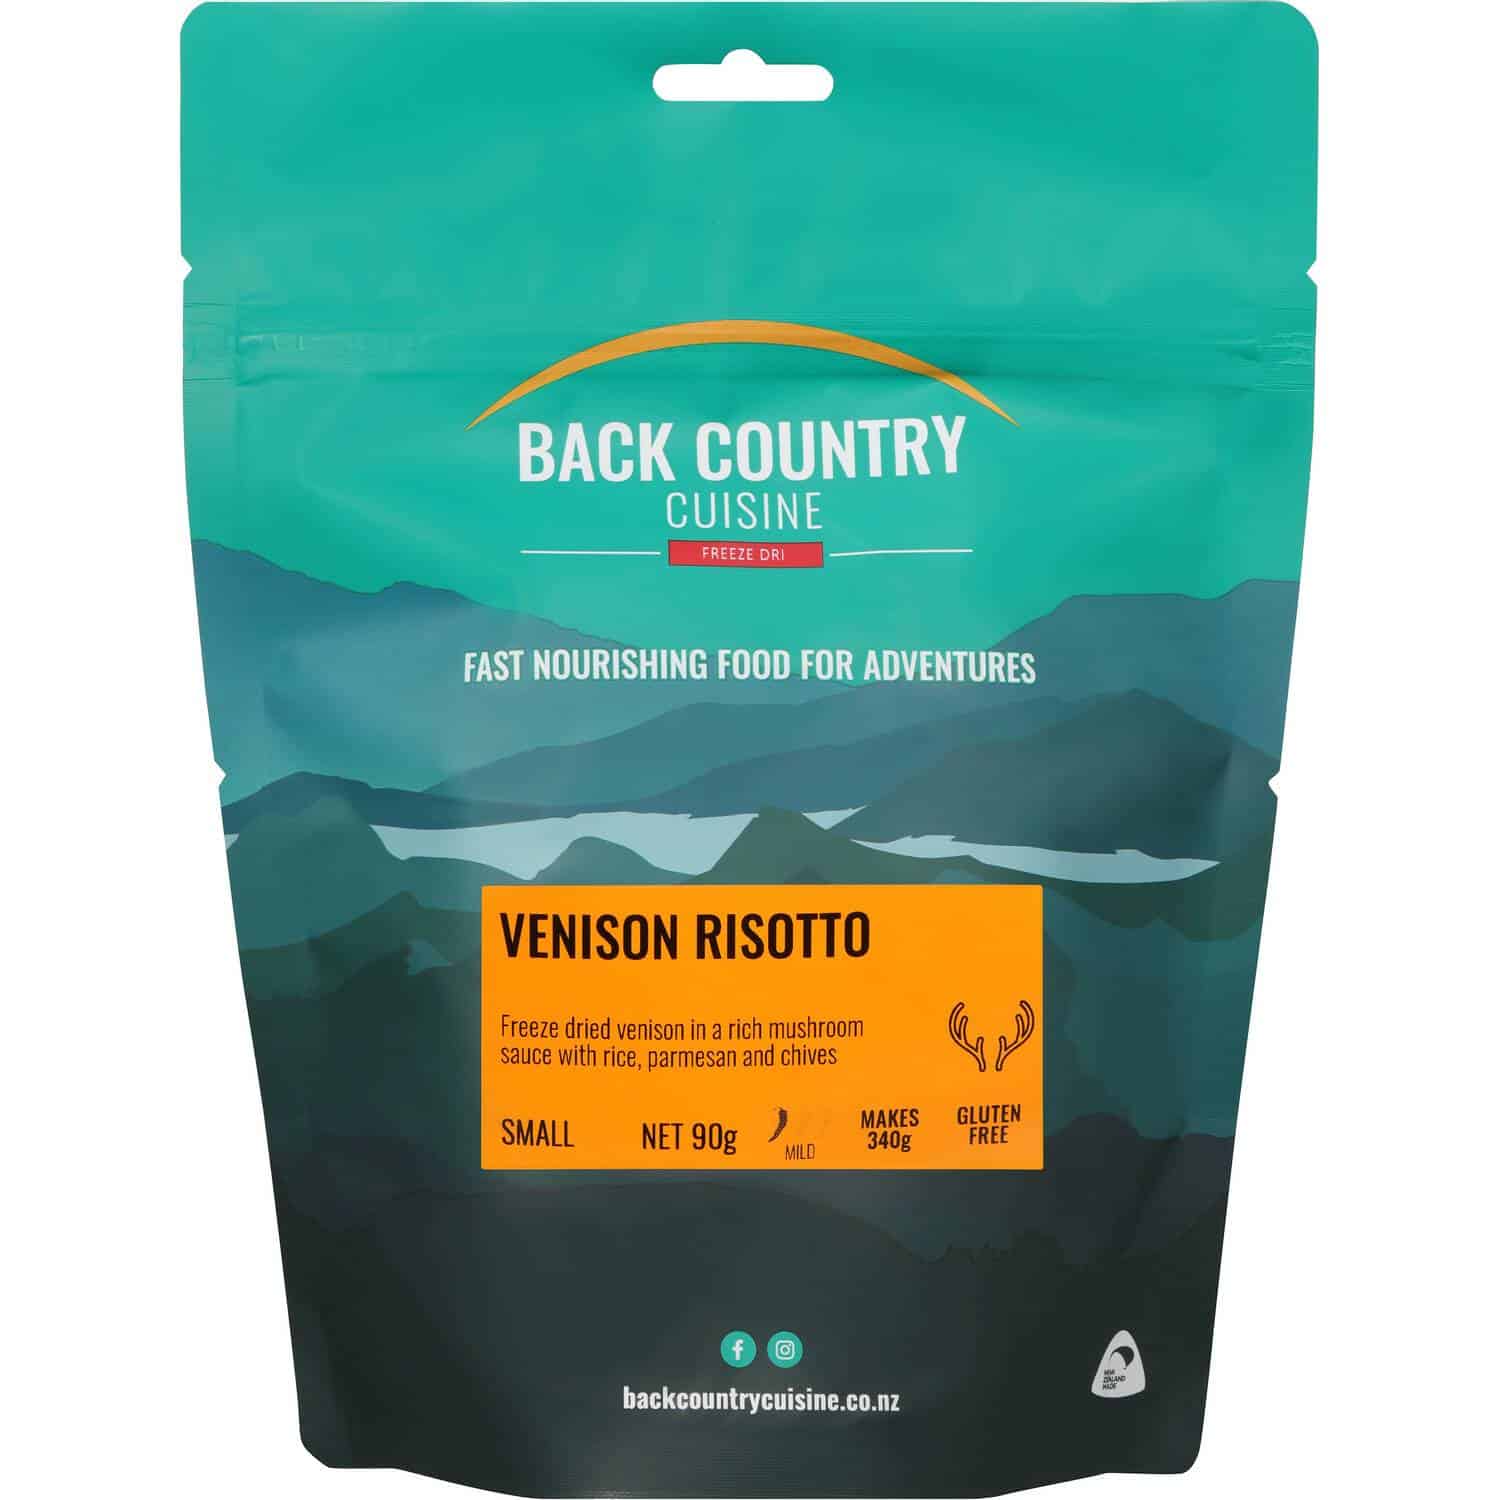 Back Country Cuisine Venison Risotto Small - Tramping Food and Accessories sold by Venture Outdoors NZ